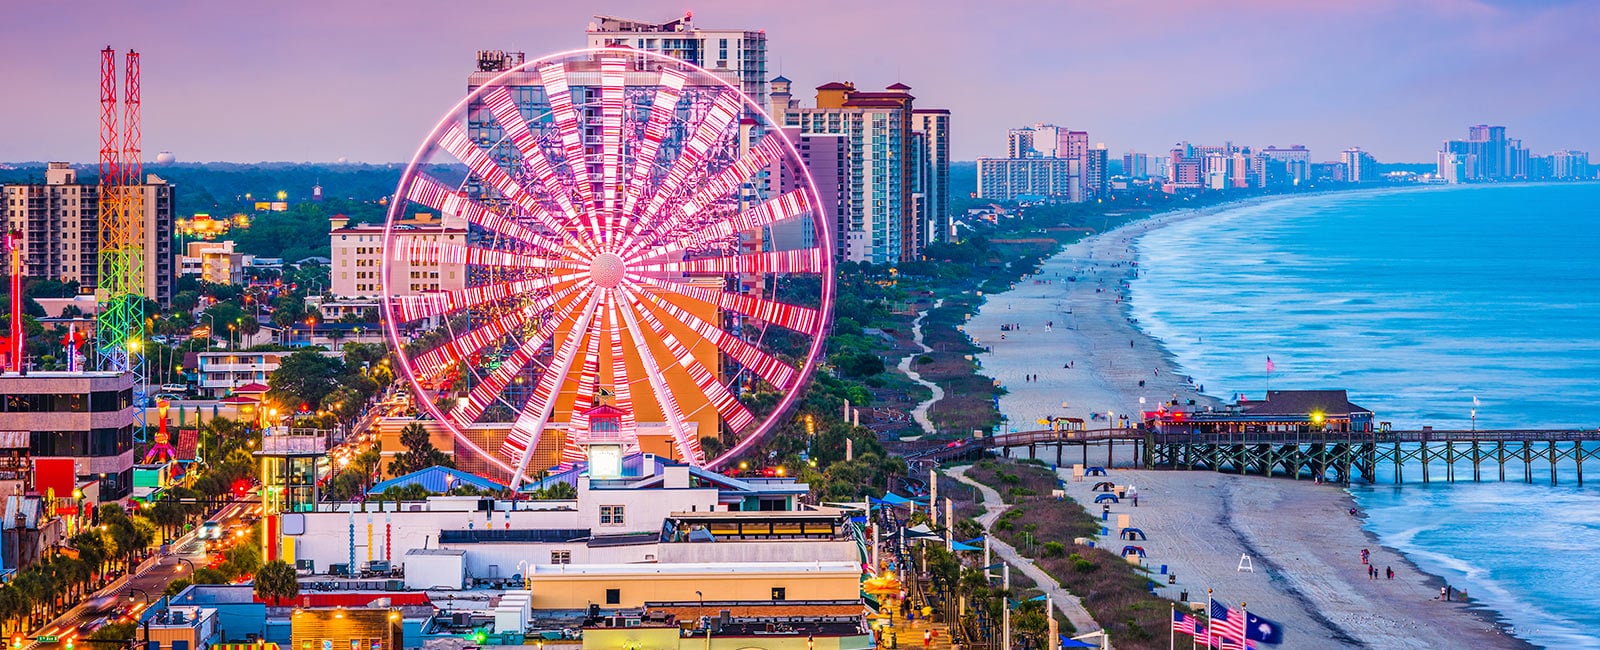 Enjoy a vacation in Myrtle Beach, South Carolina with Hilton Grand Vacations